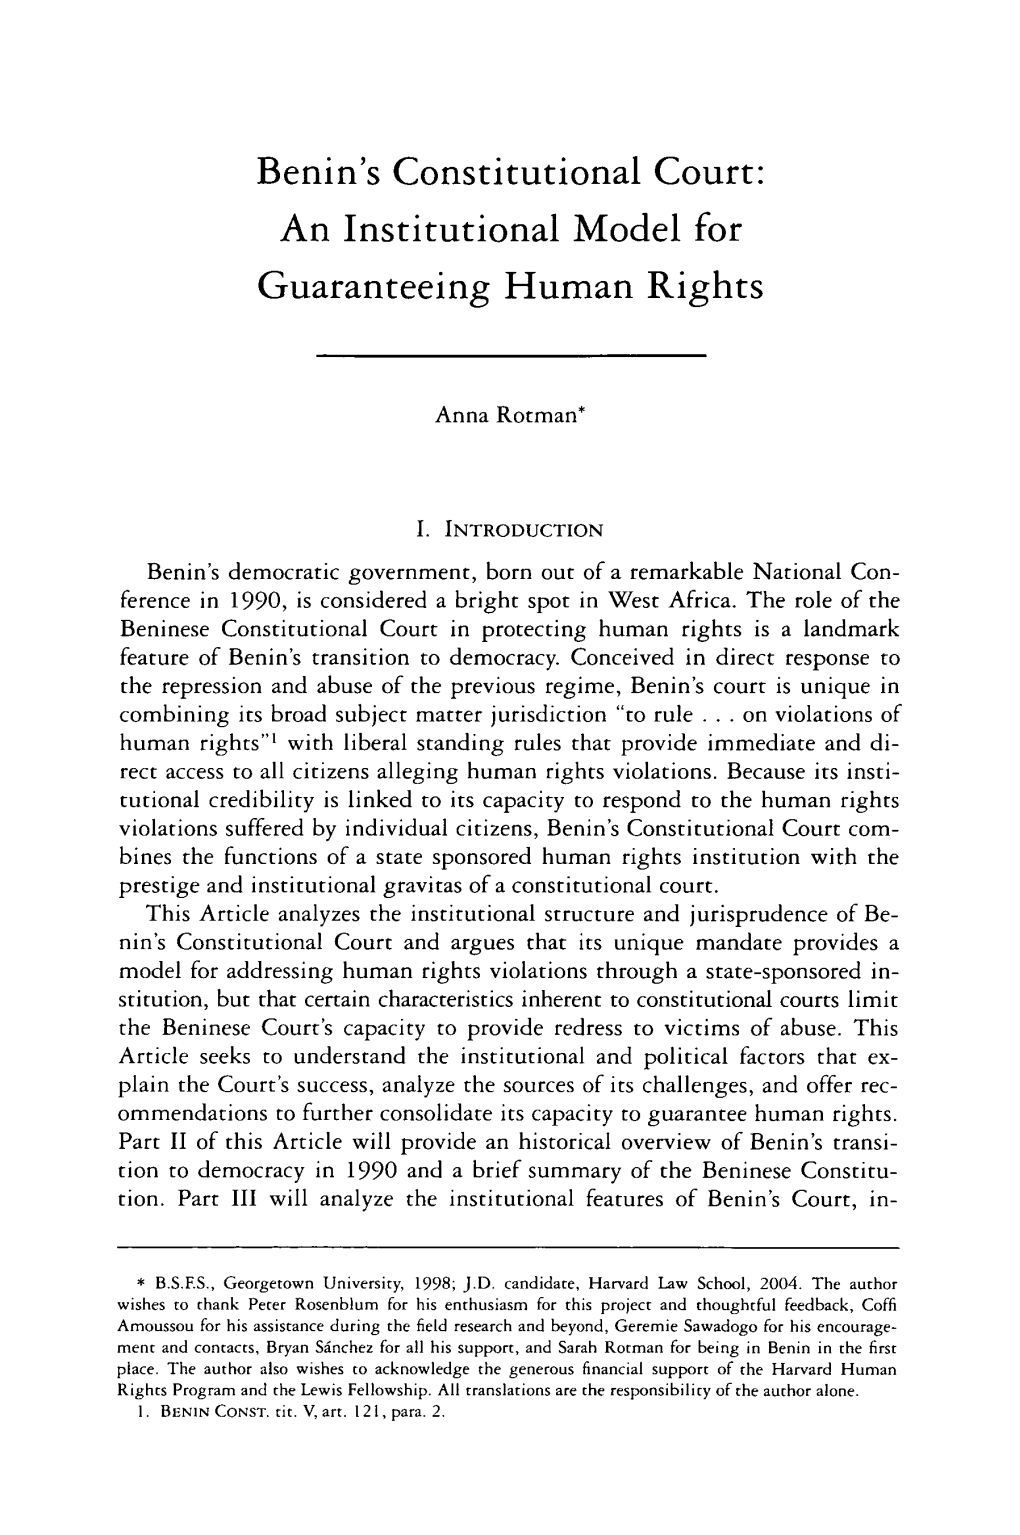 Benin's Constitutional Court: an Institutional Model for Guaranteeing Human Rights